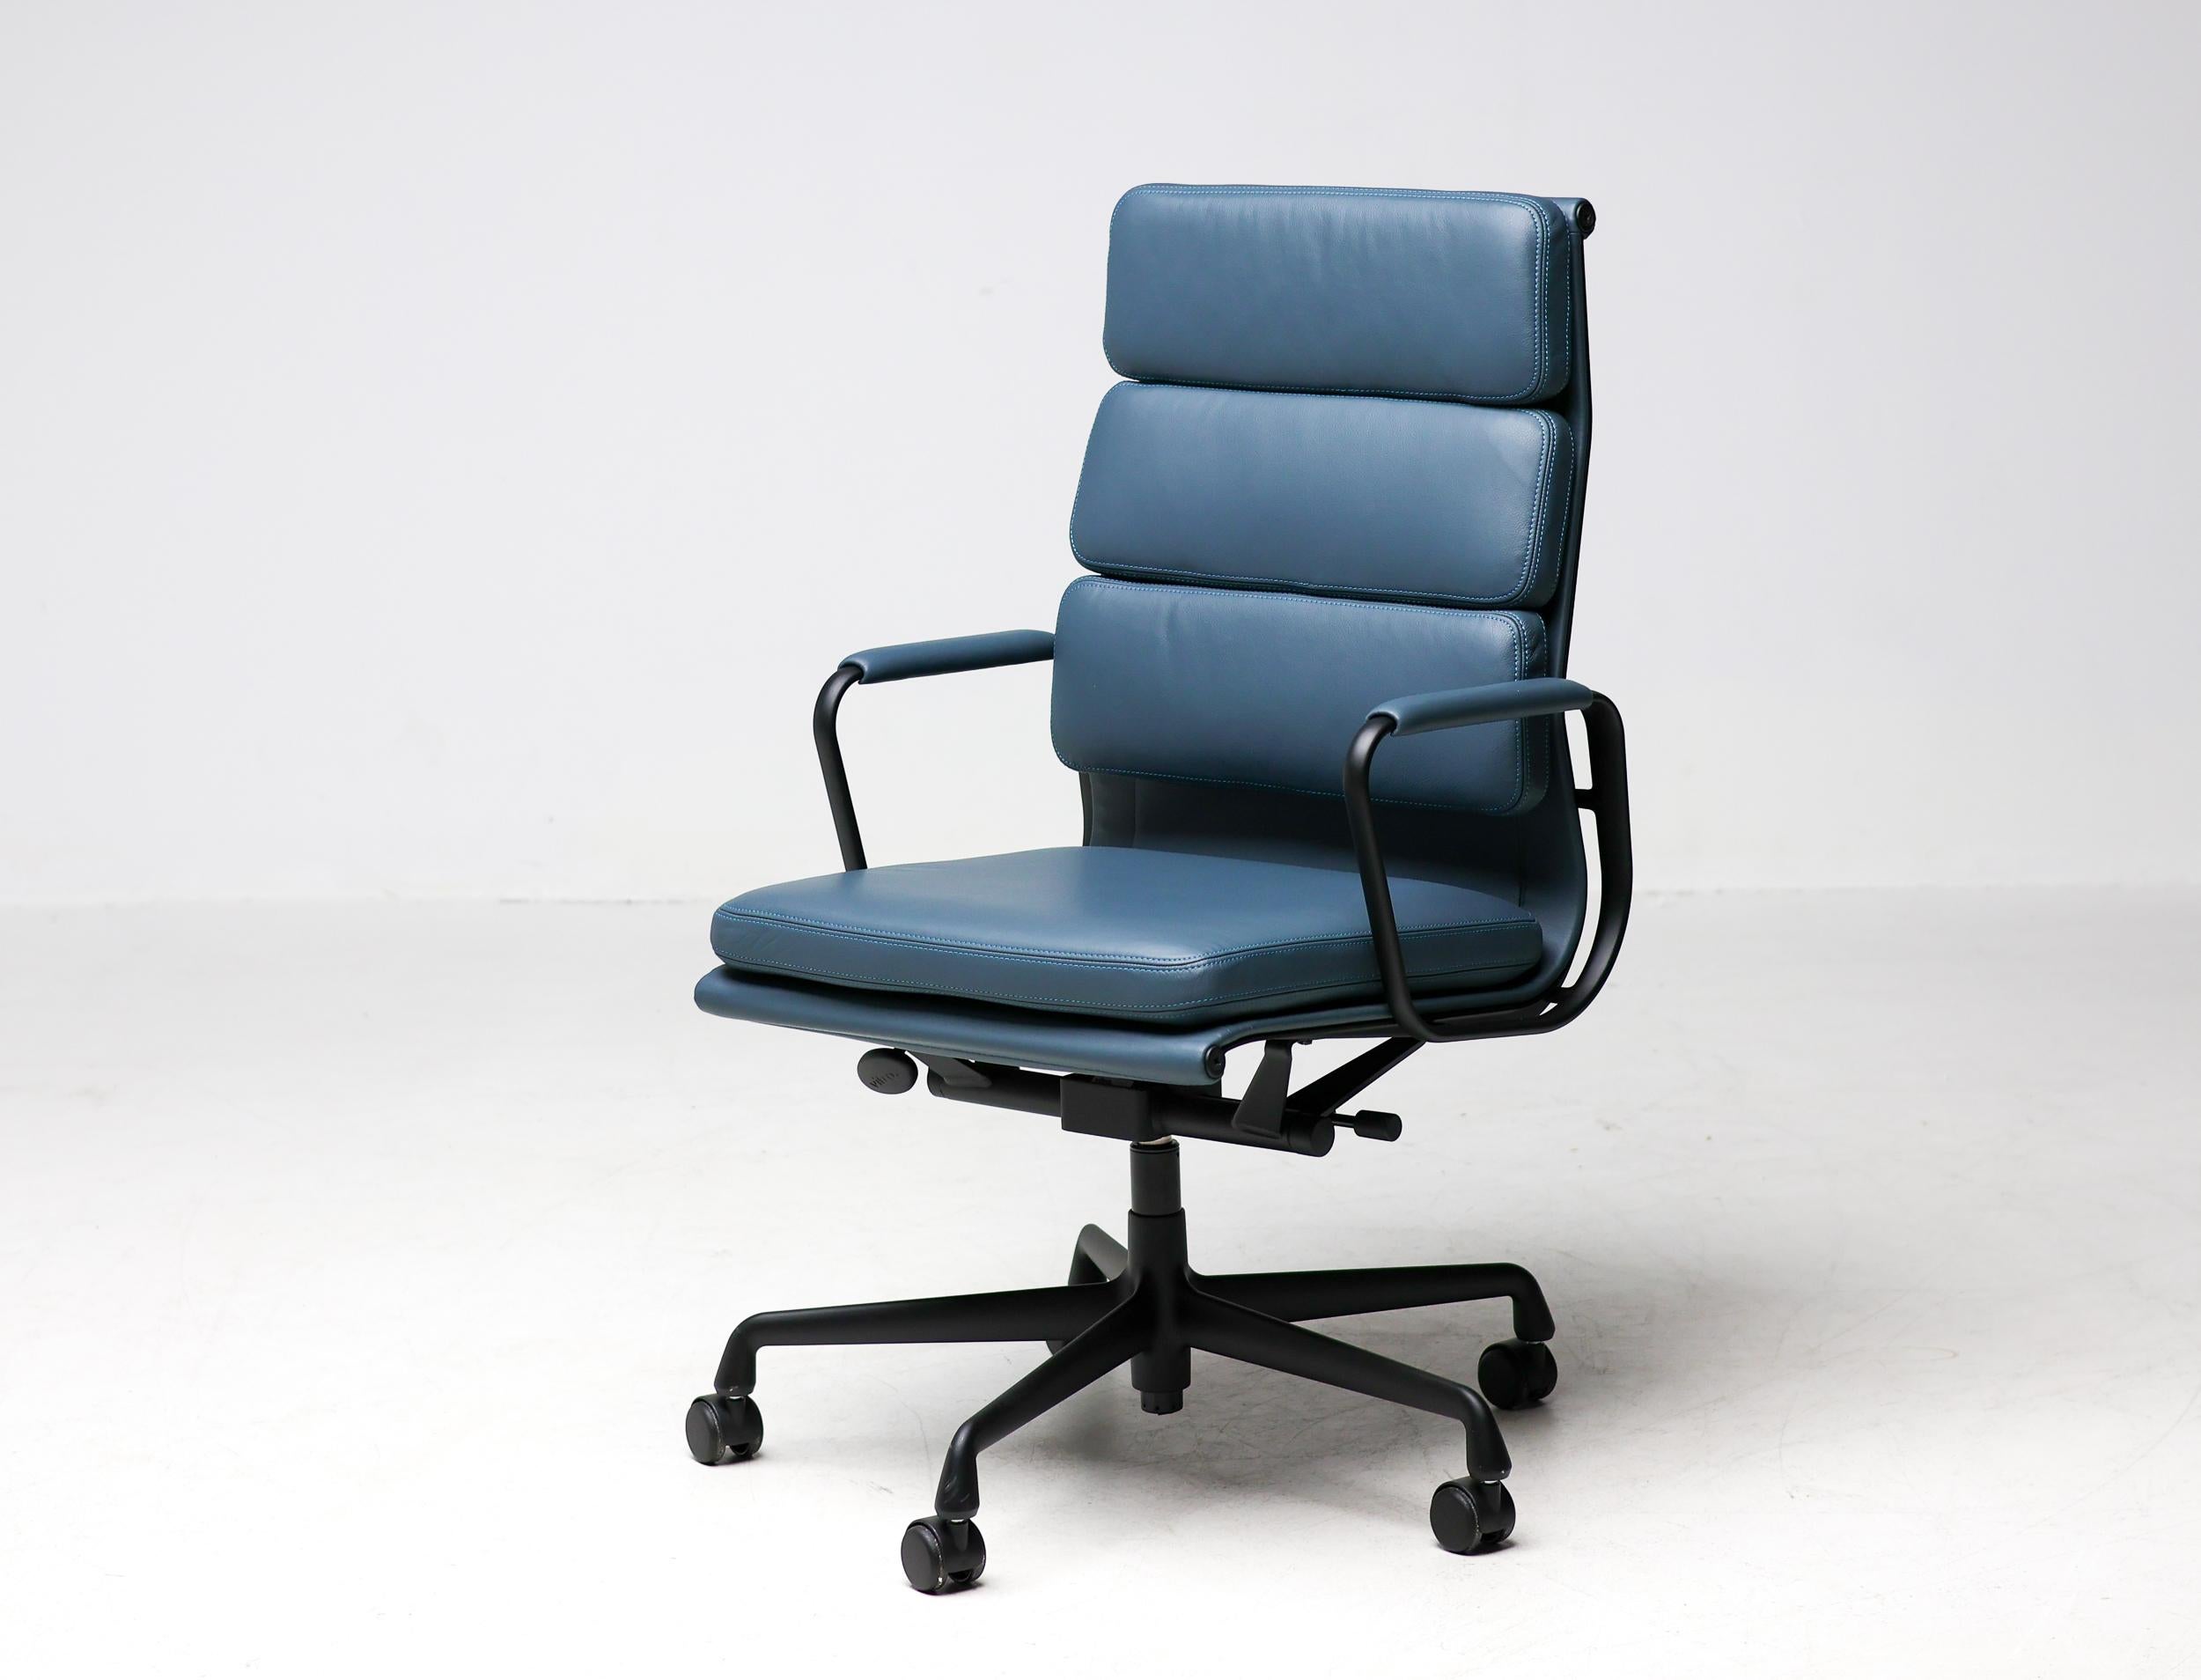 Bespoke Charles & Ray Eames Smoke Blue Leather EA219 Desk Chair For Sale 3